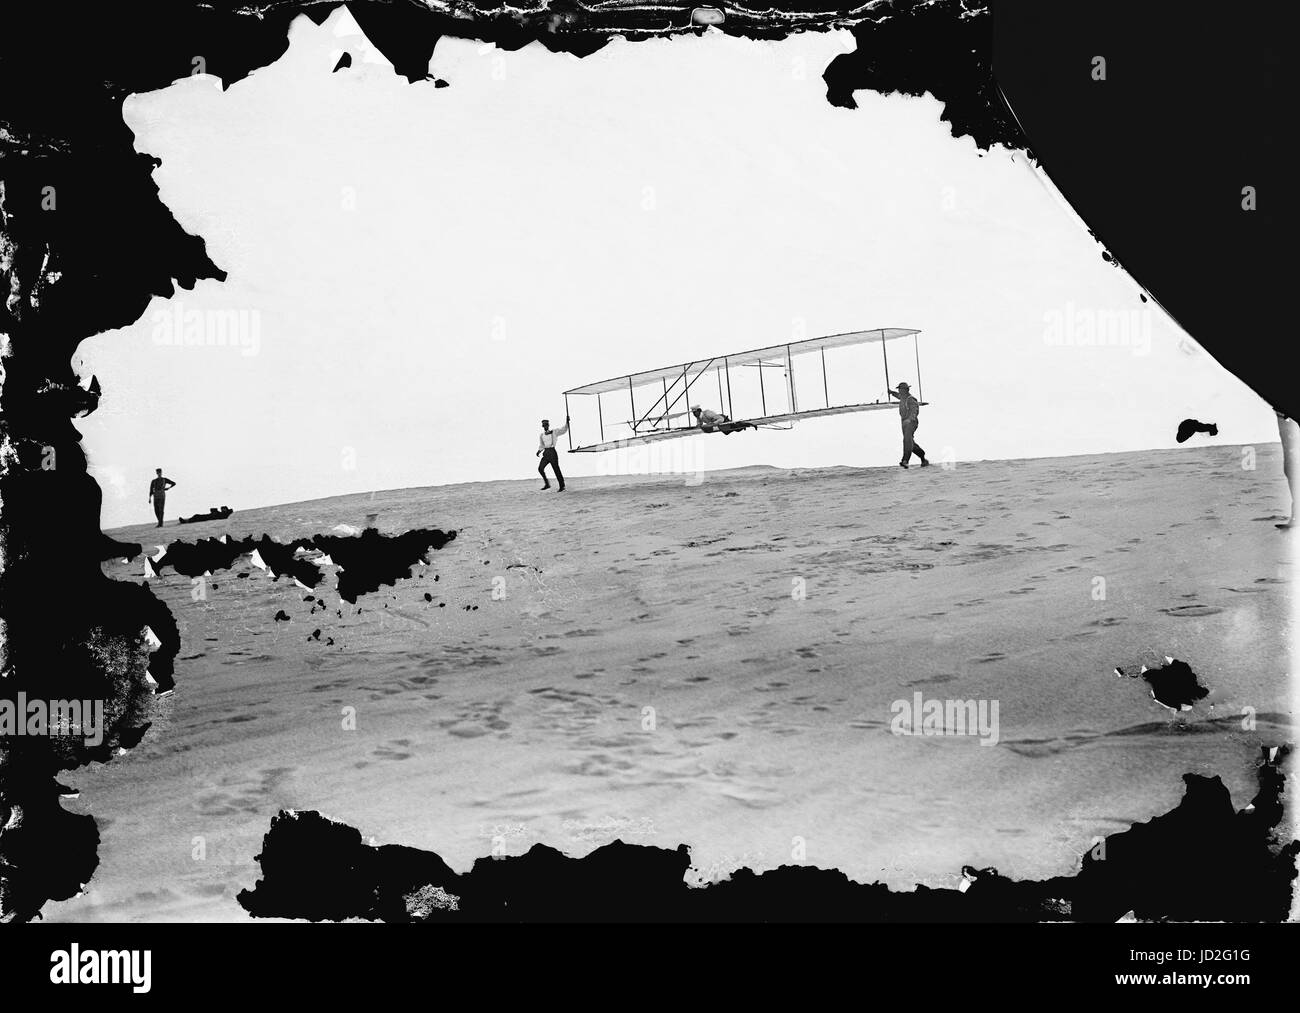 Start of a glide; Wilbur in motion at the left holding one end of glider (rebuilt with single vertical rudder), Orville lying prone in machine, and Dan Tate at right; Photographed  October 10, 1902, Kitty Hawk, North Carolina. The photograph was made on a 5' x 7' dry glass plate and is attributed to Wilbur and/or Orville Wright. Stock Photo